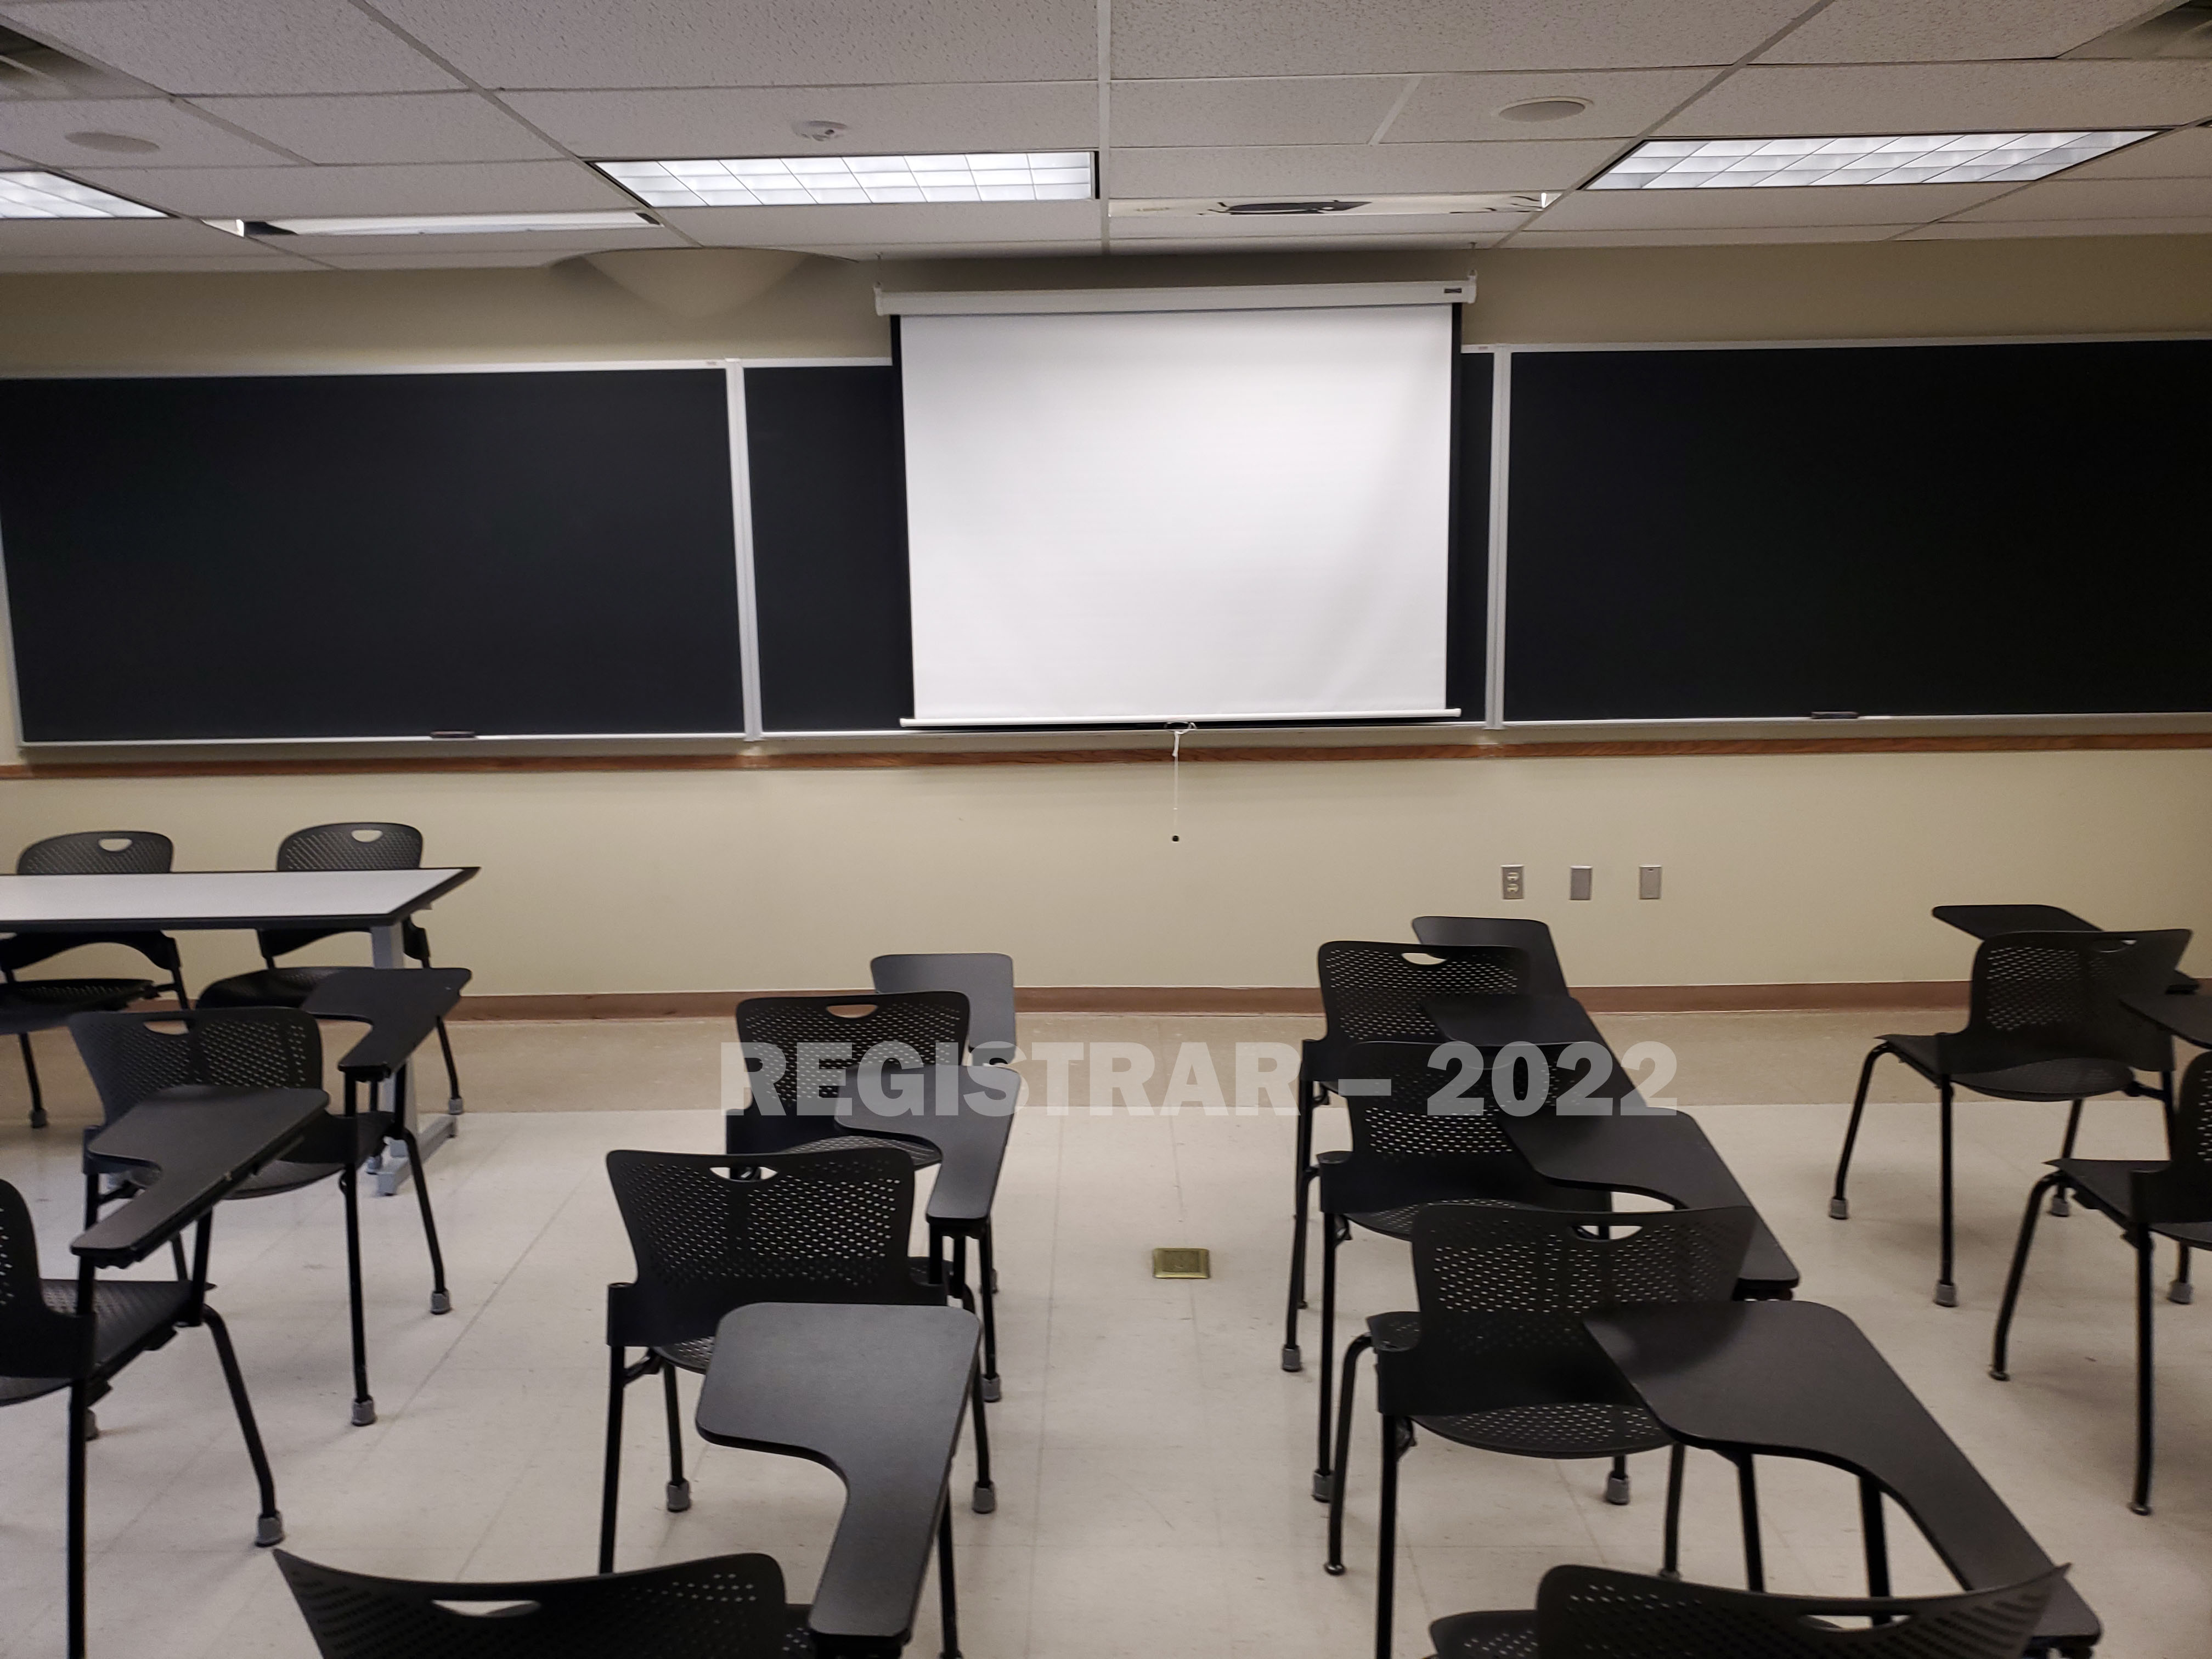 Enarson Classroom Building room 258 view from the back of the room with projector screen down